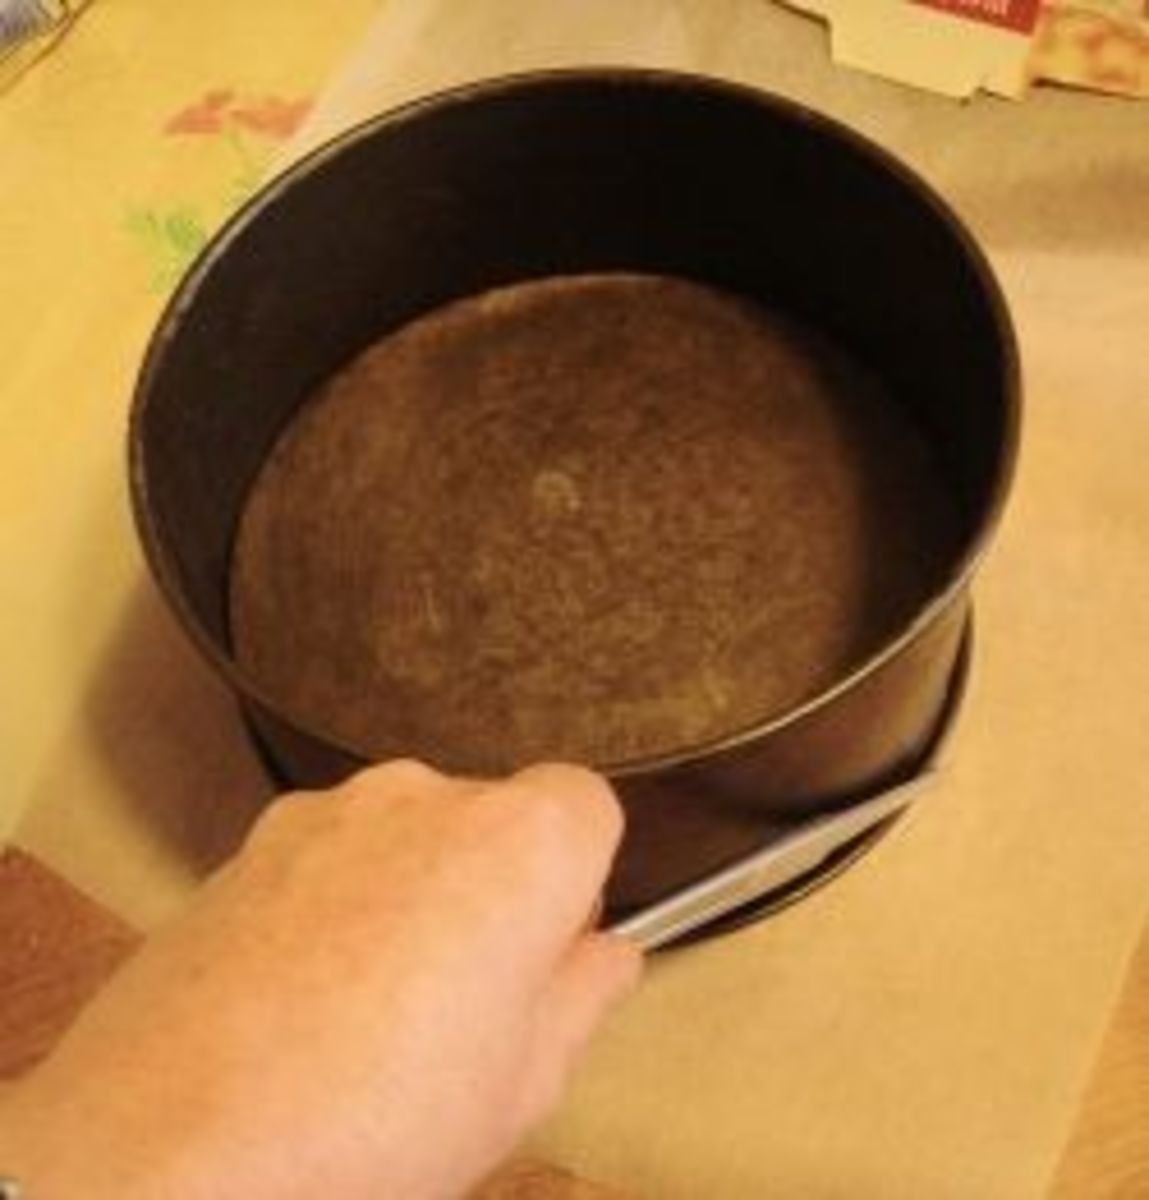 Marking the base of the cake tin with scissors